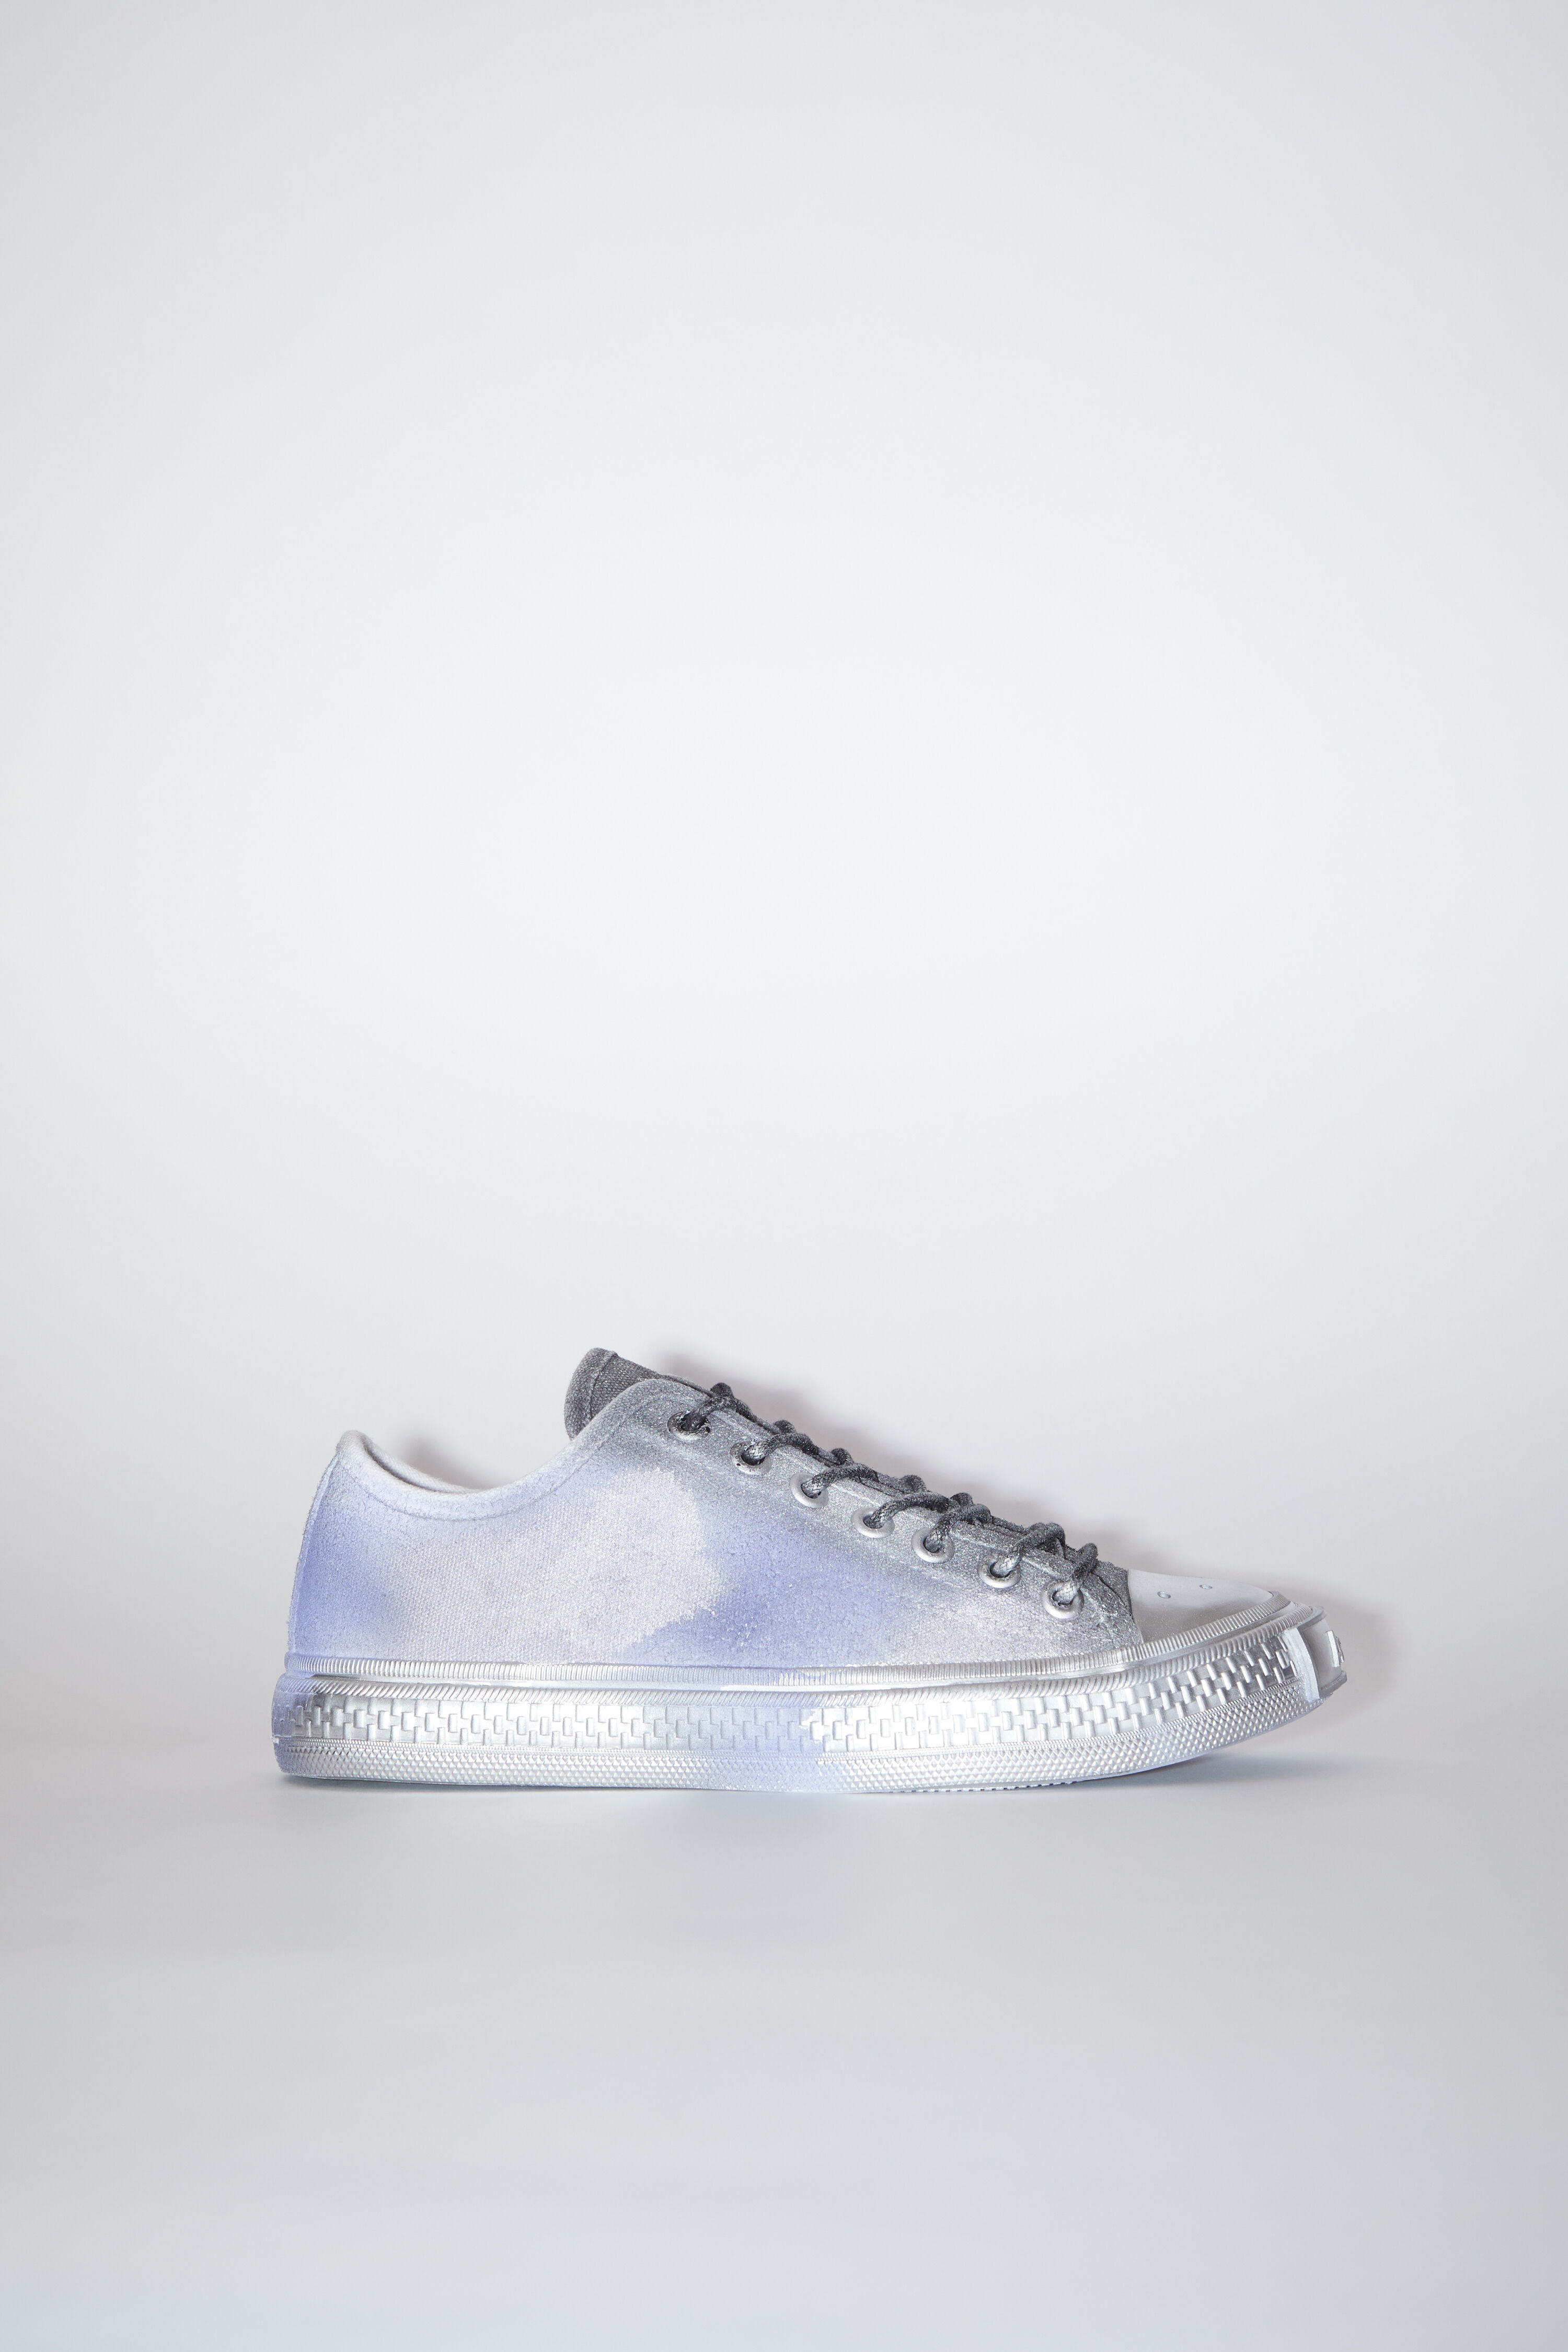 Acne Studios Metallic Quilted Sneakers - Farfetch